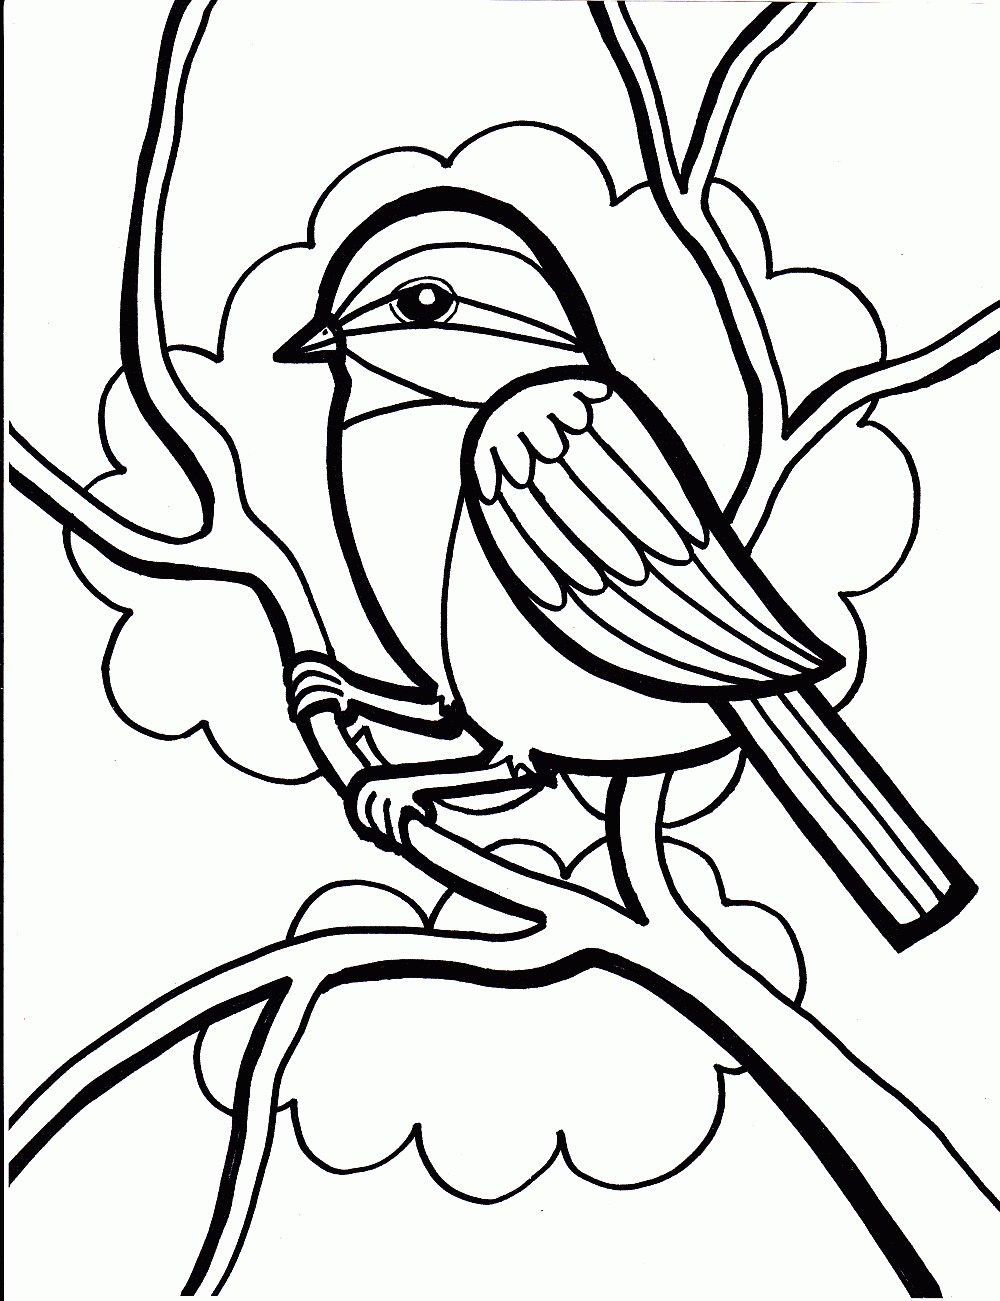 Coloring Page for kids ~ Child Coloring